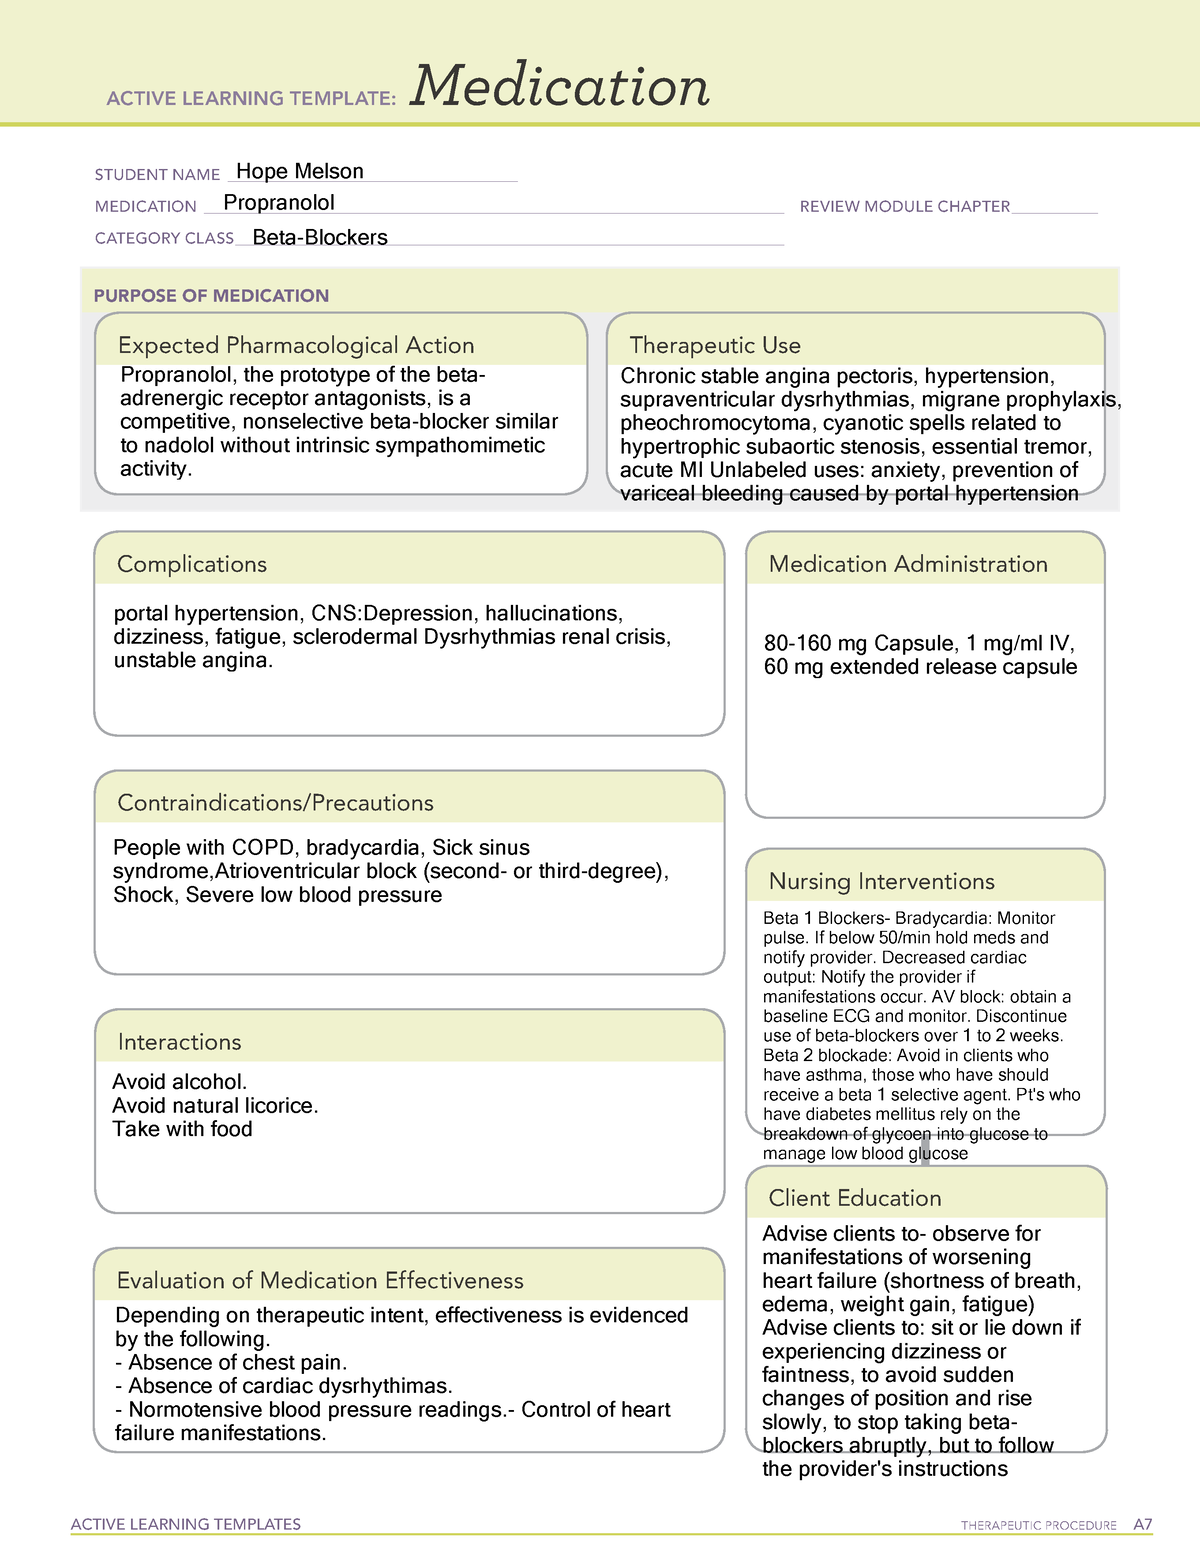 2022-ati-medication-template-propranolol-active-learning-templates